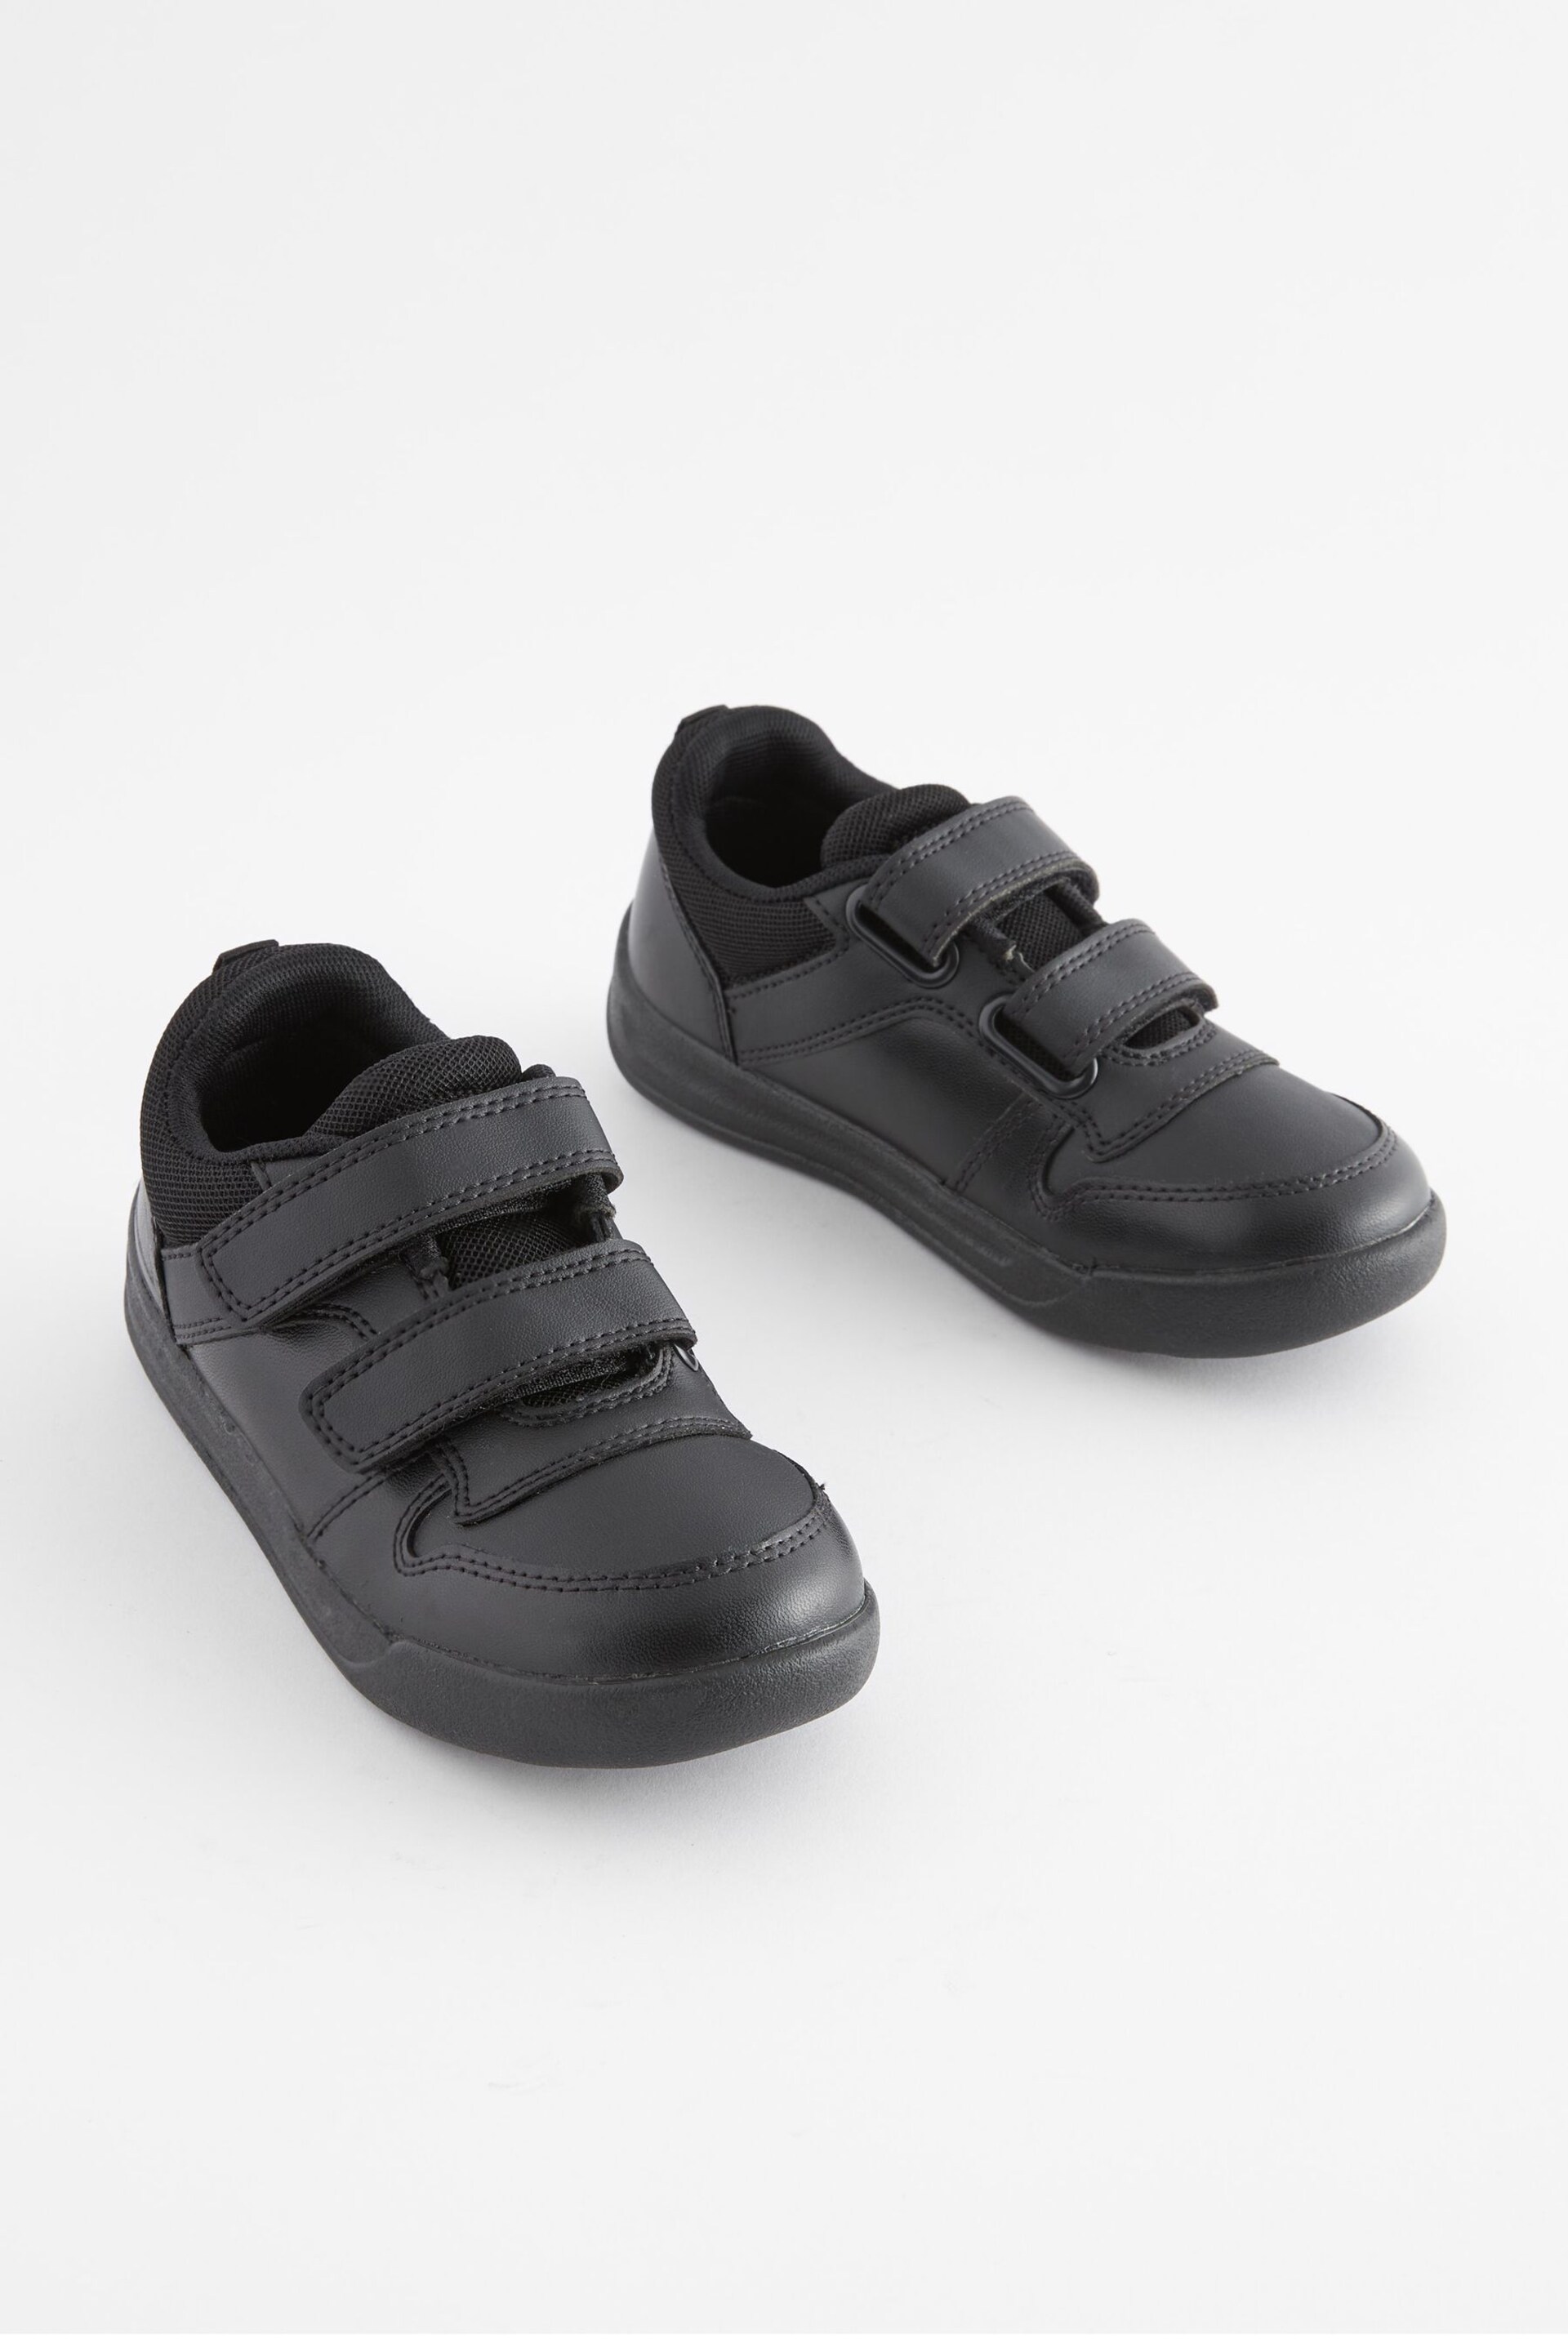 Black Strap Touch Fasten Wide Fit (G) School Trainers - Image 6 of 10